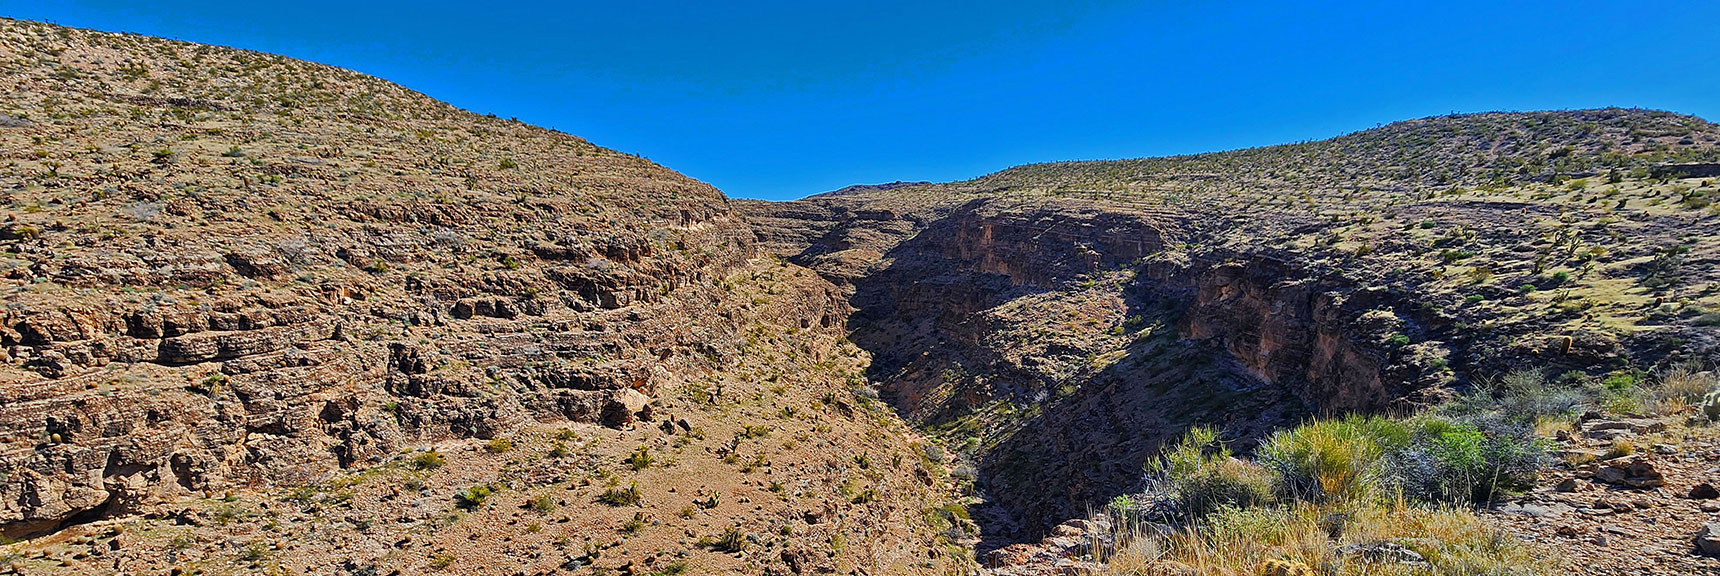 The Canyon Washes Below Look Fairly Easy to Traverse. However, There May Be Some Barriers. | Blue Diamond Hill Southern Ridgelines | Red Rock Canyon, Nevada